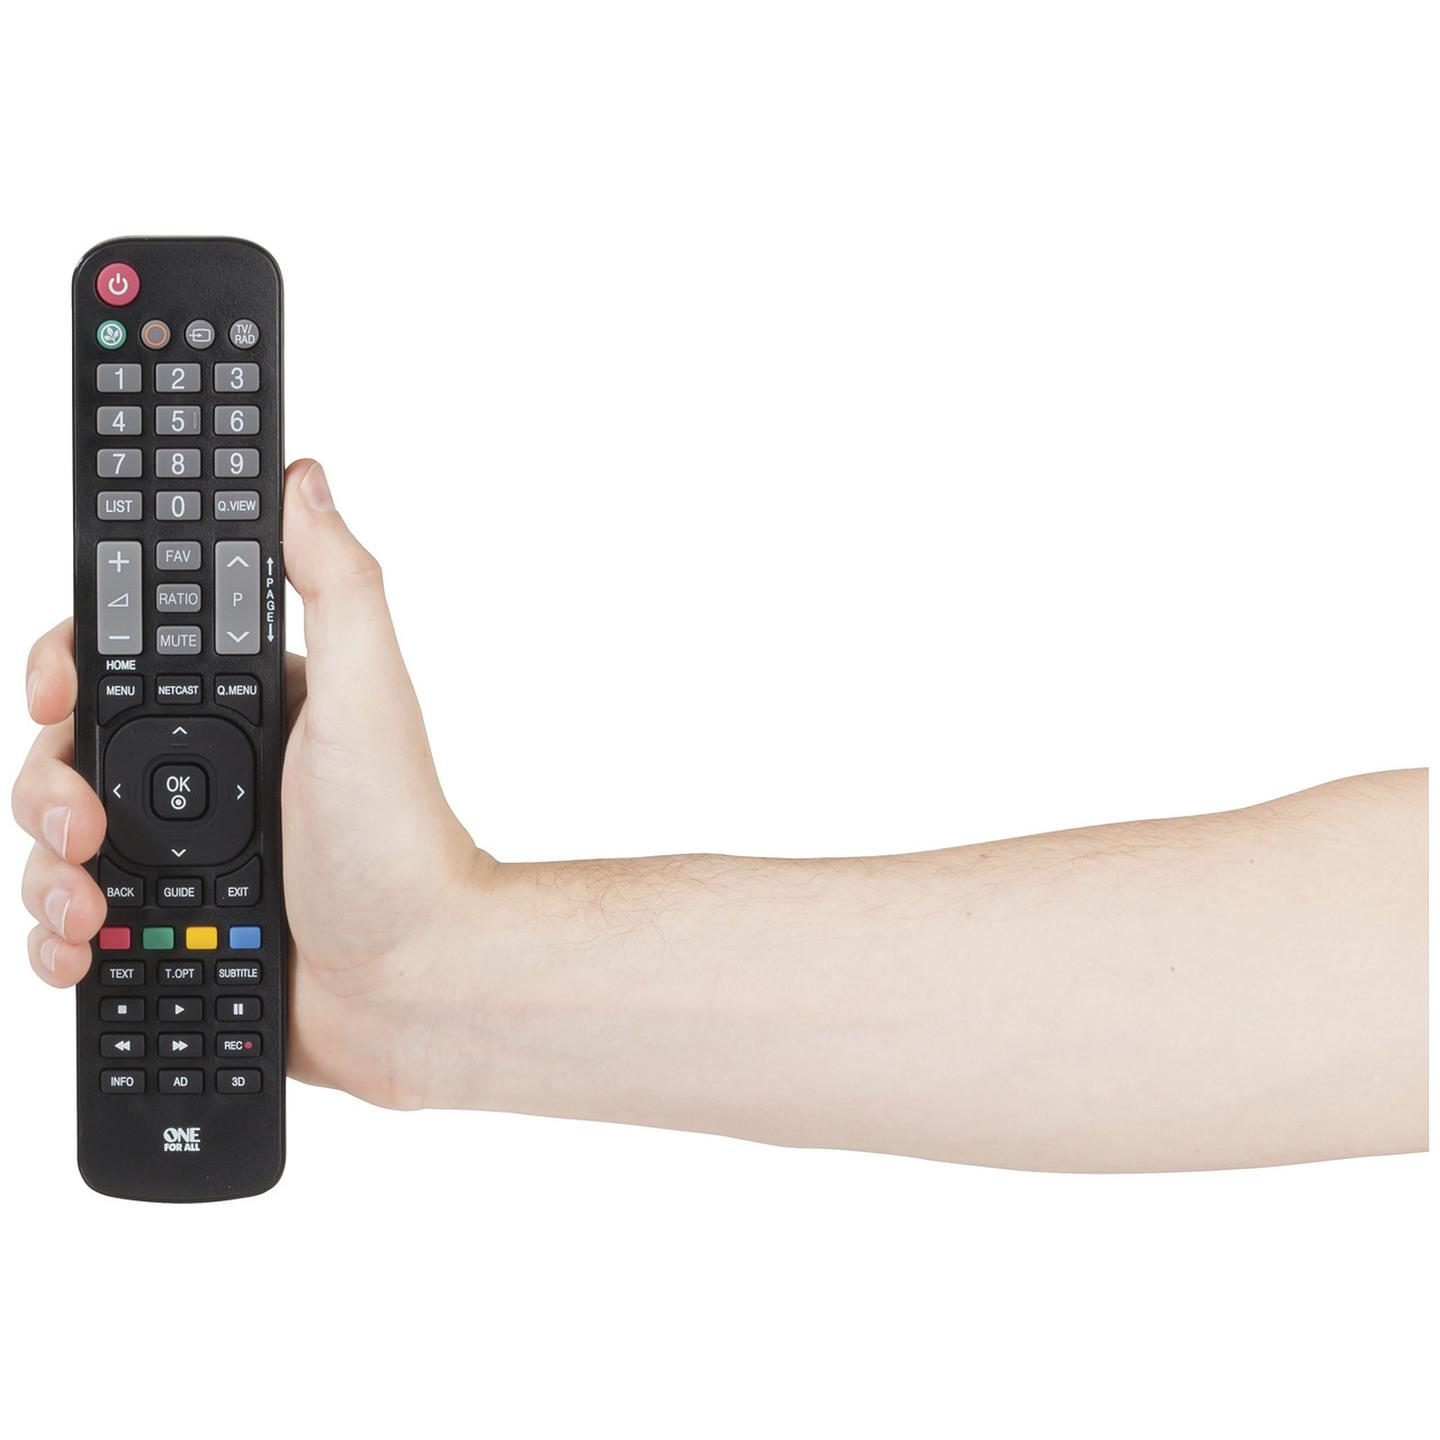 Replacement Remote for LG TVs